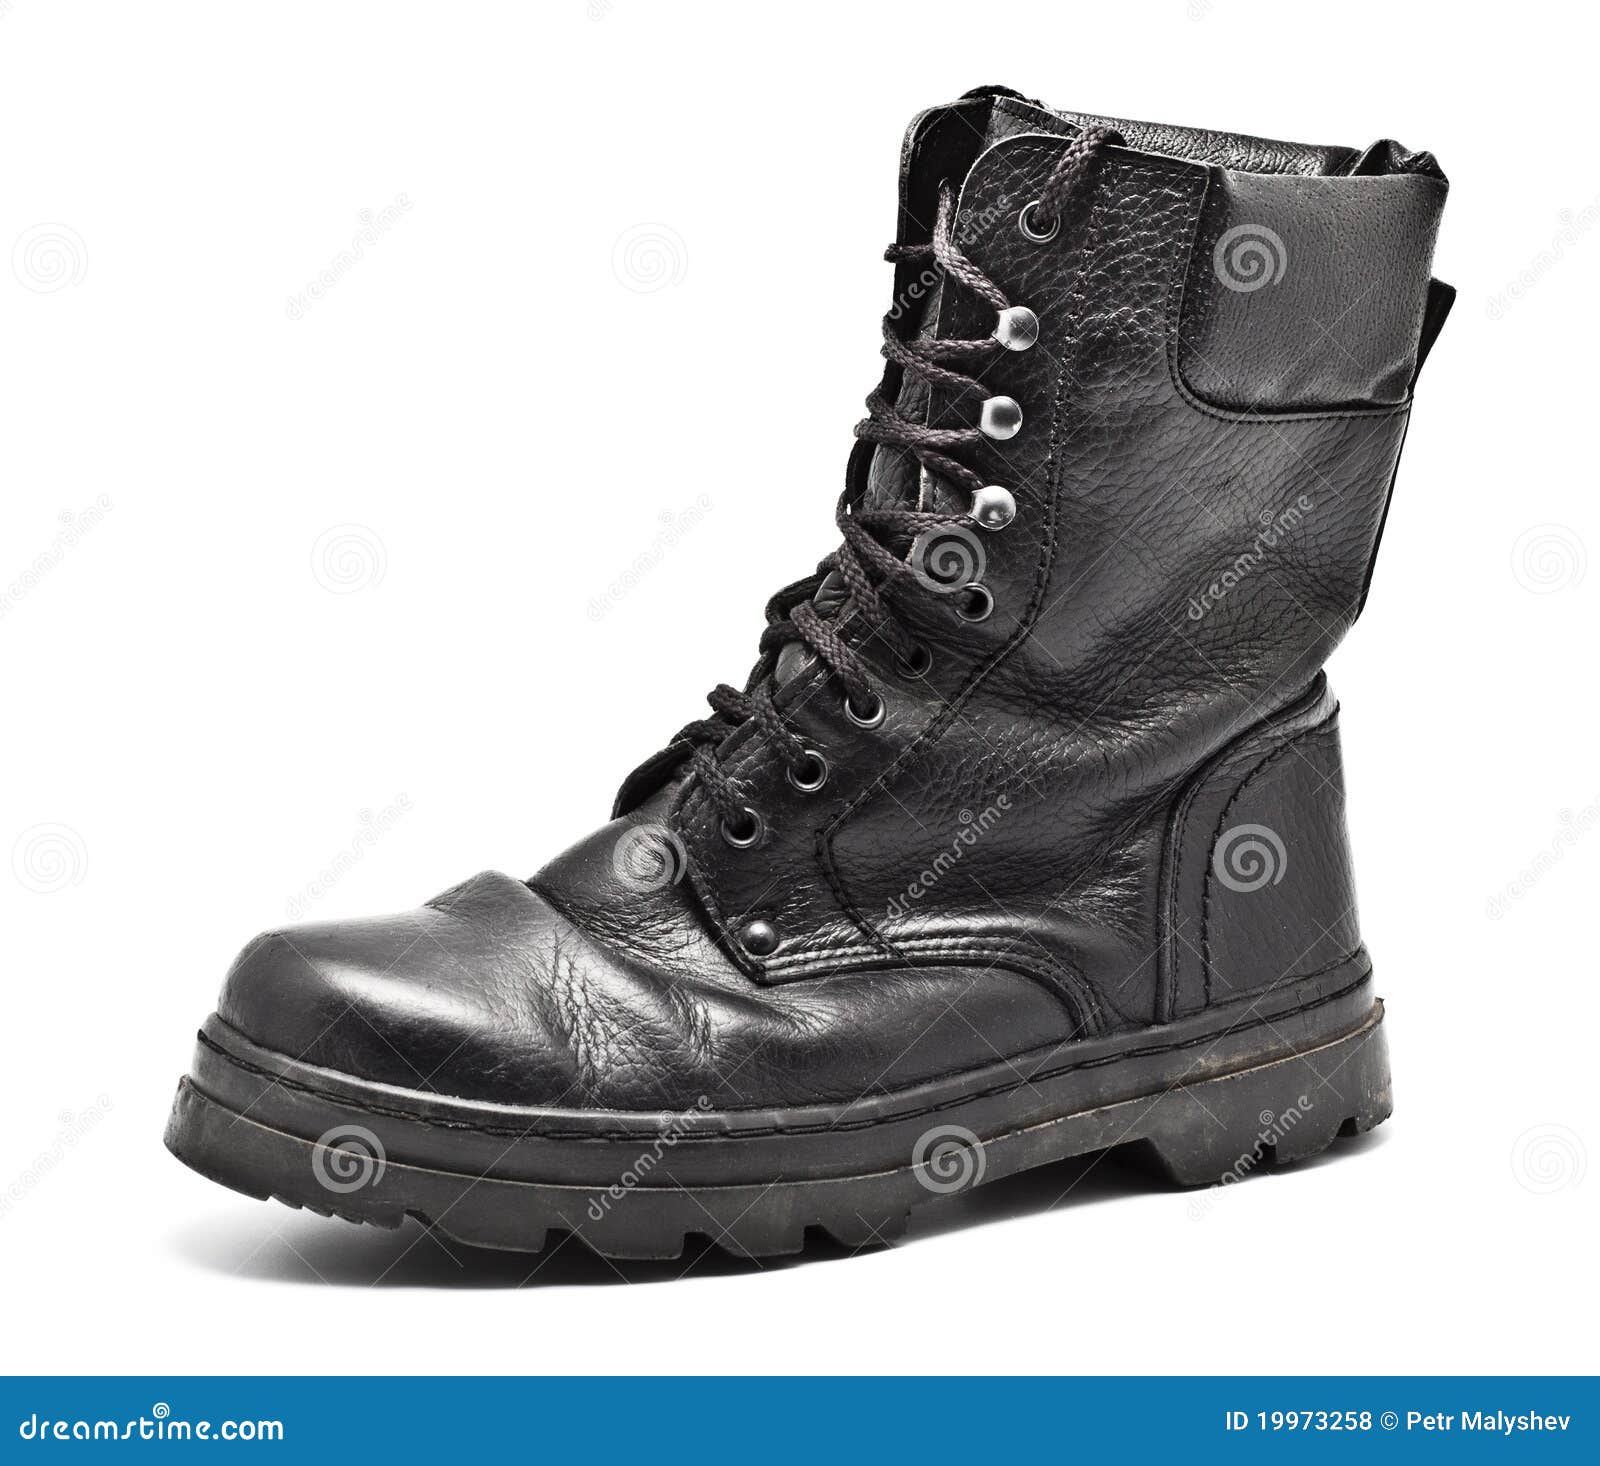 Black Leather Army Boot stock photo. Image of landings - 19973258